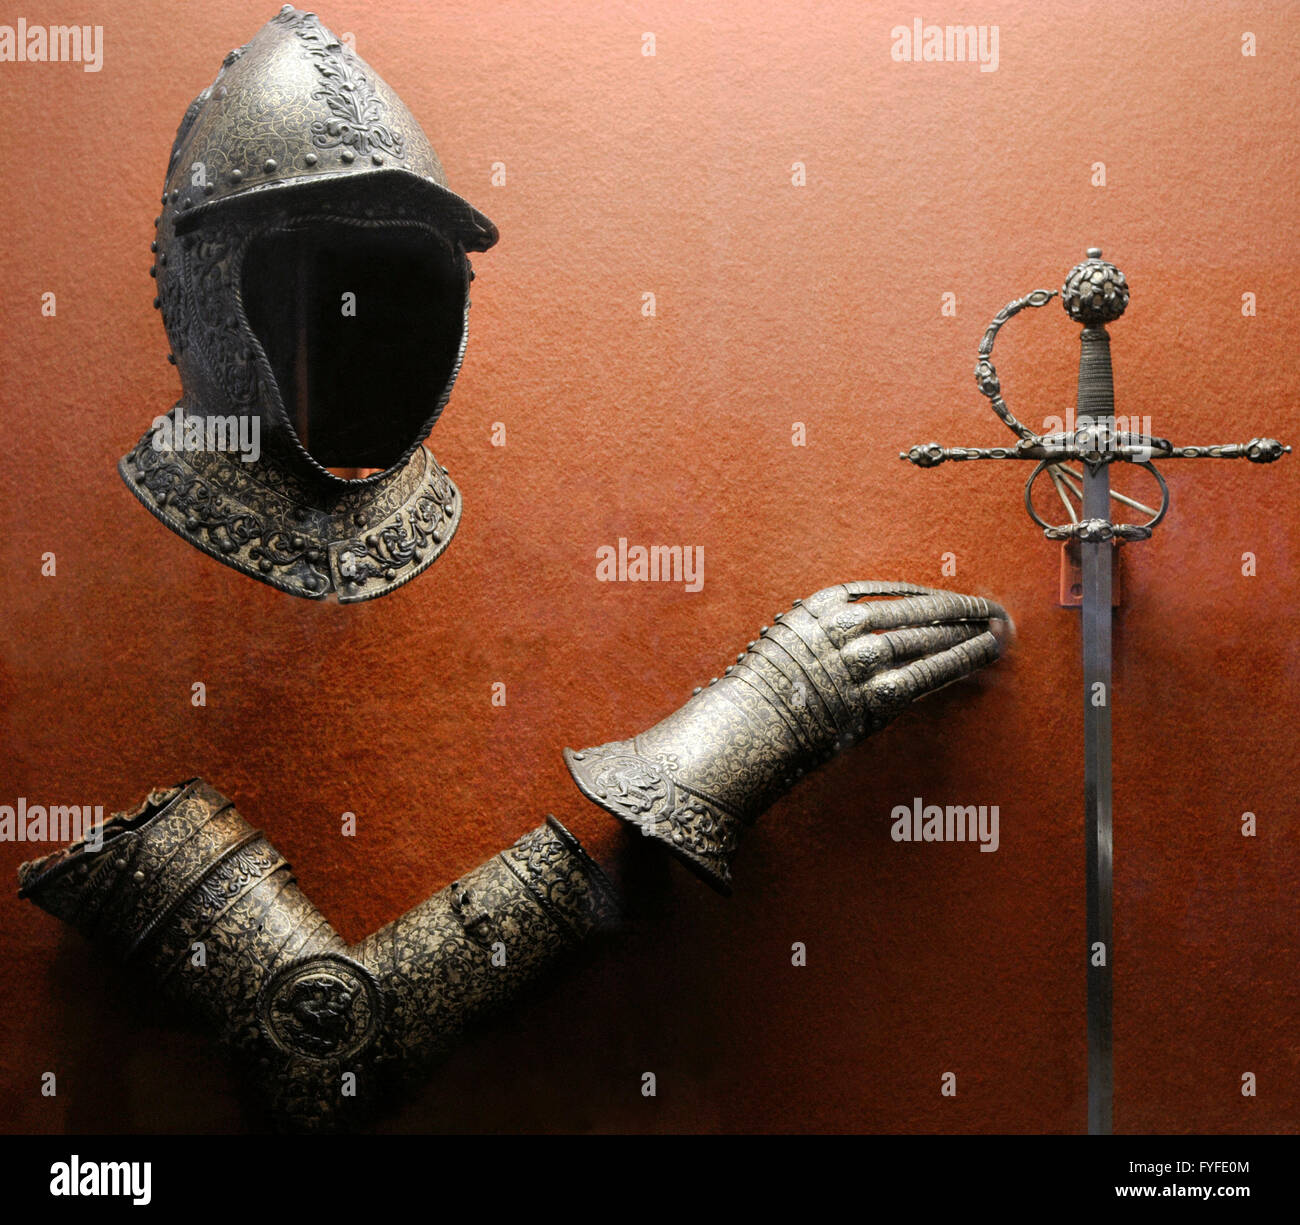 Parts of armor: helmet, vambrace or forearm guards and gauntlet. Ca. 1550-1560. Italy. Knights' Hall. The State Hermitage Museum. Saint Petersburg. Russia. Stock Photo